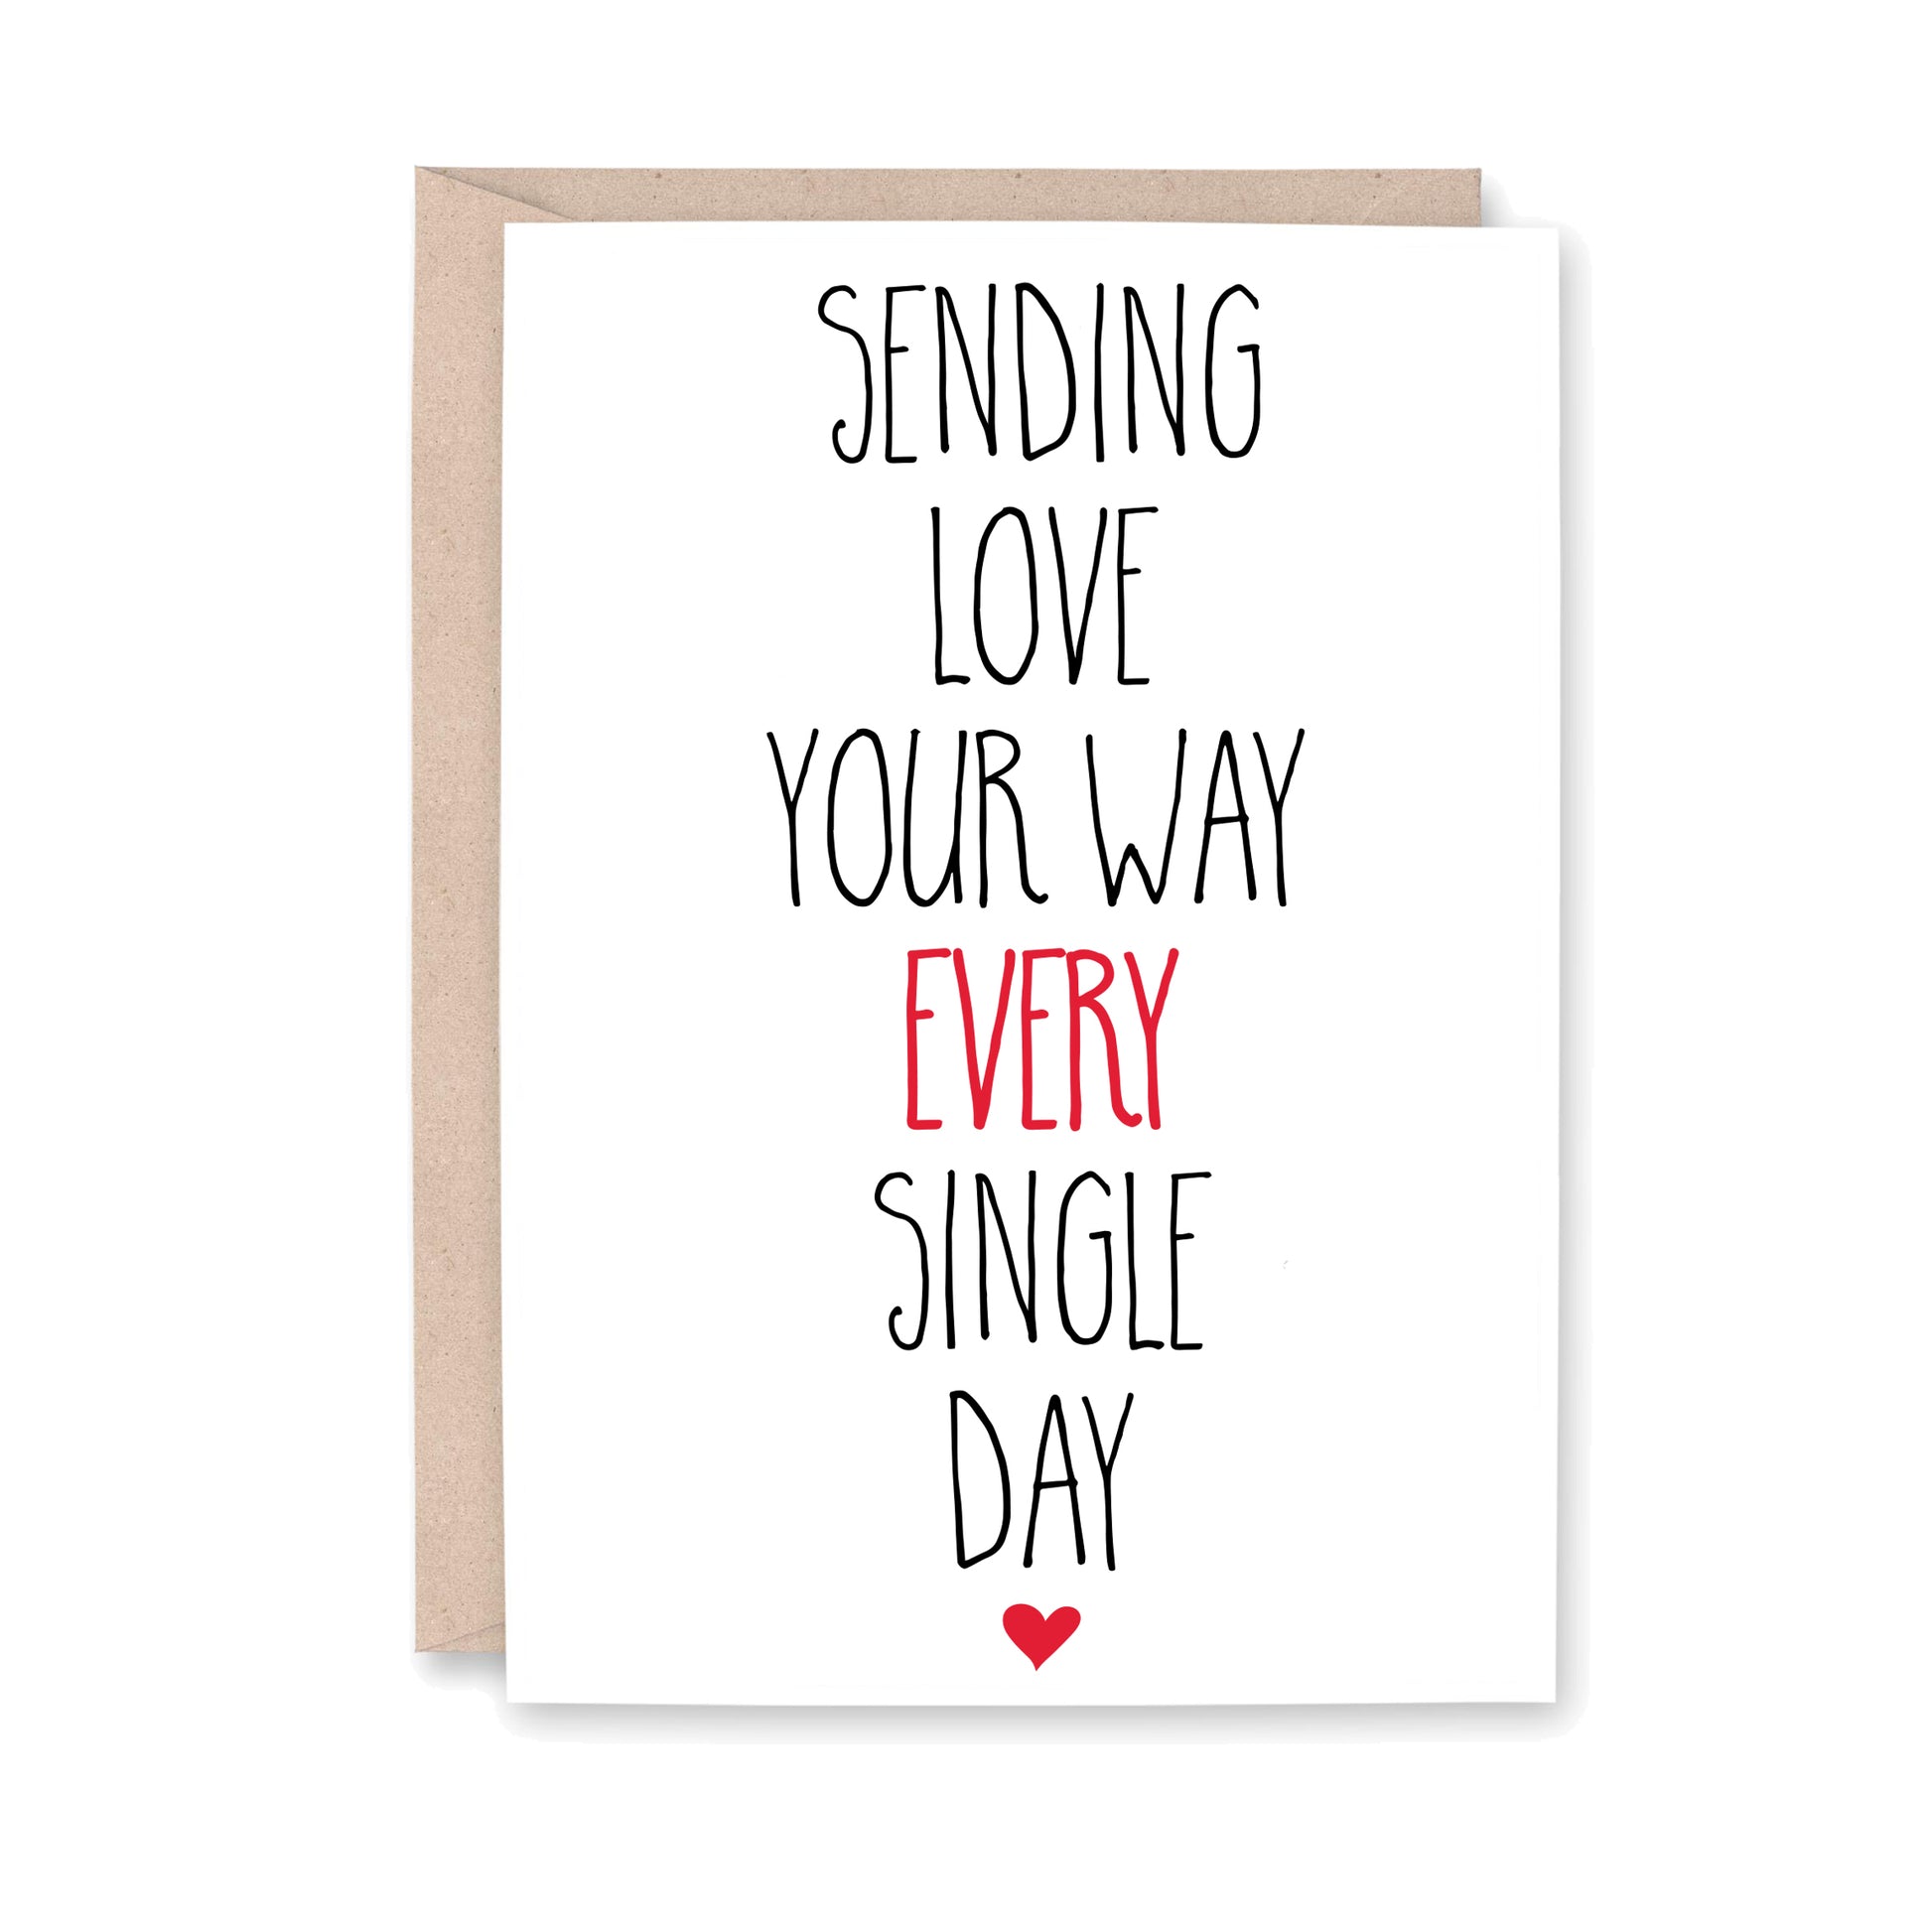 Sending Love Your Way Every Single Day Card